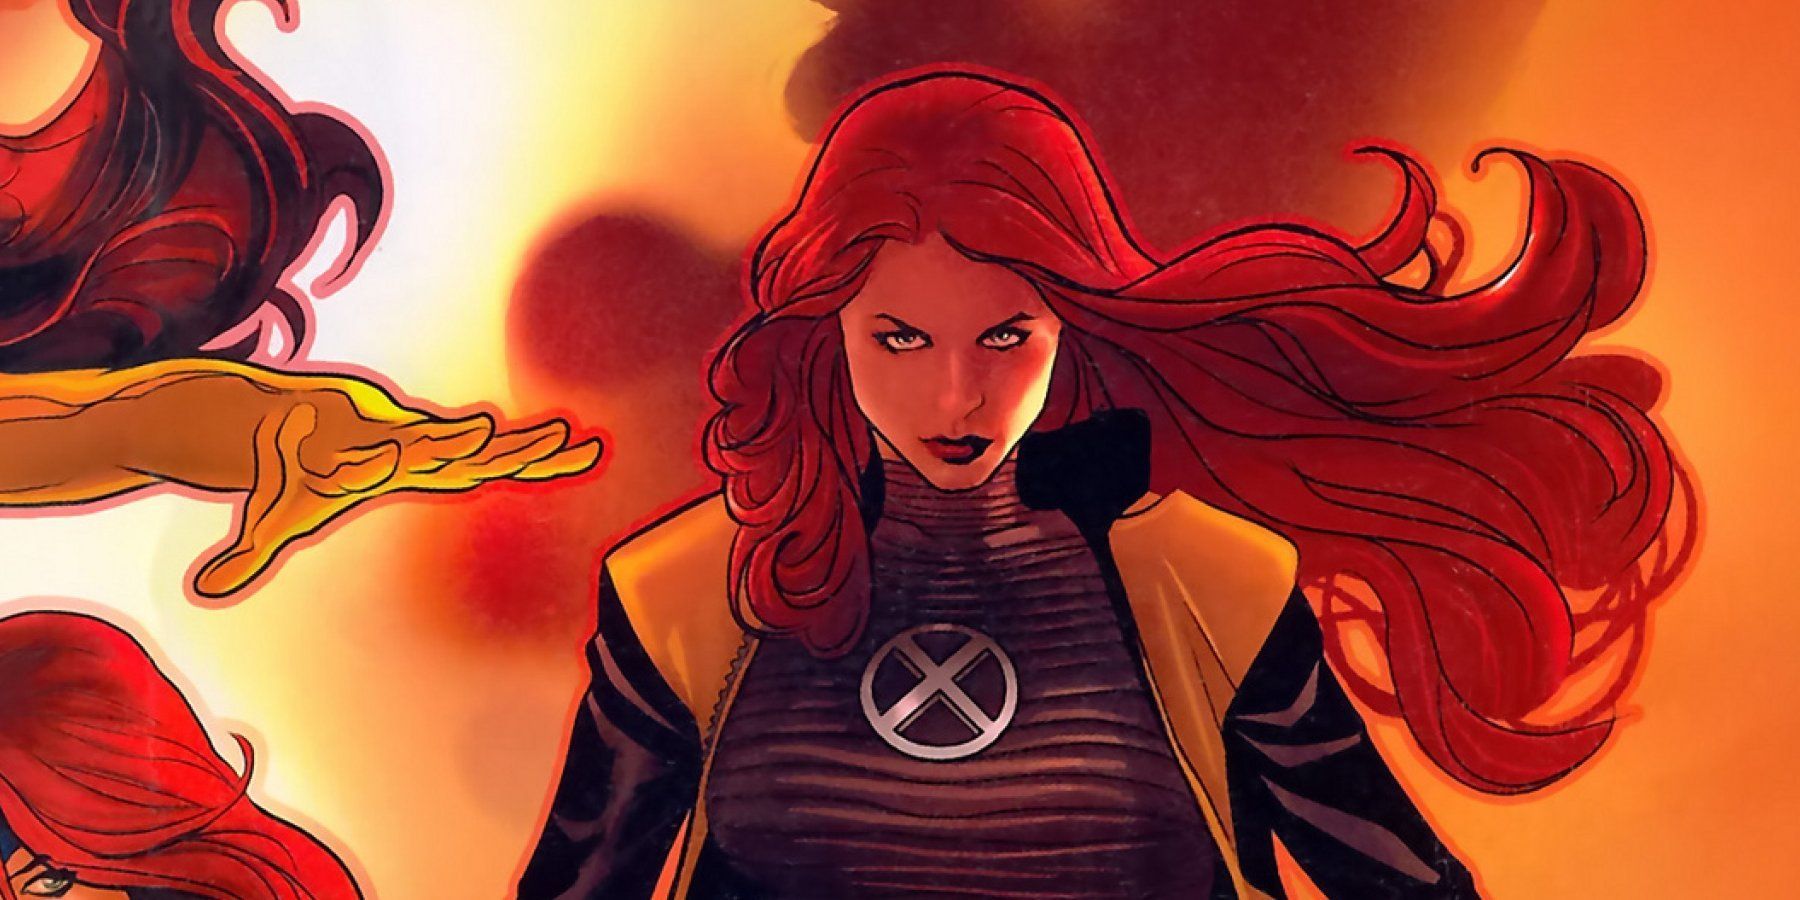 8 The First Student was Jean Grey.